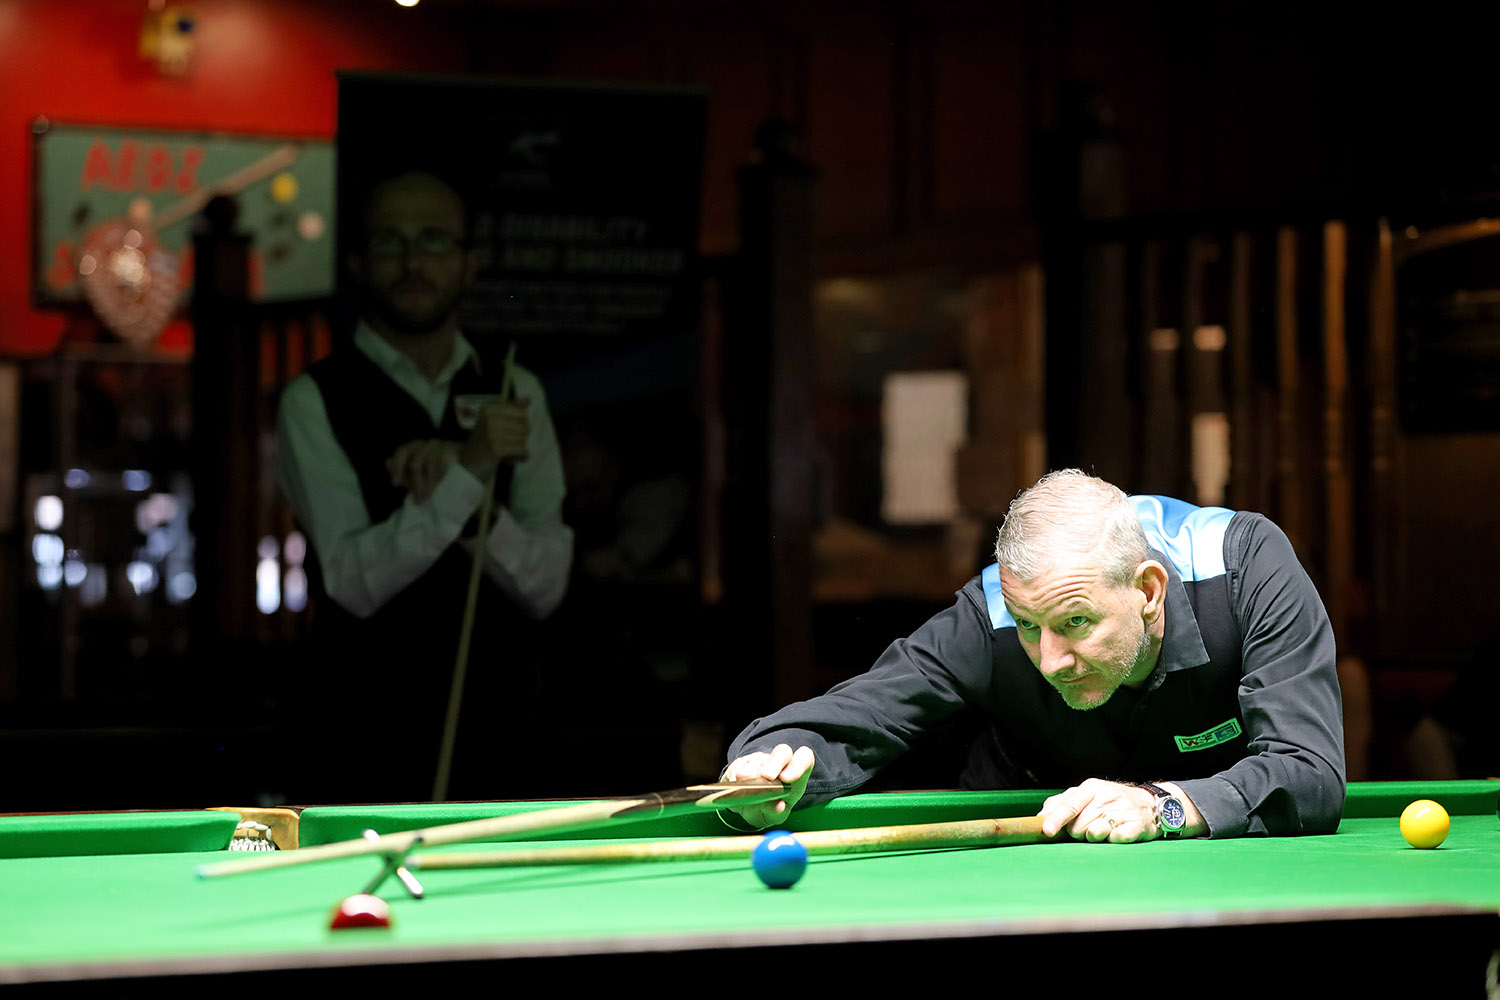 Gary Taylor plays snooker shot with Daniel Blunn in background